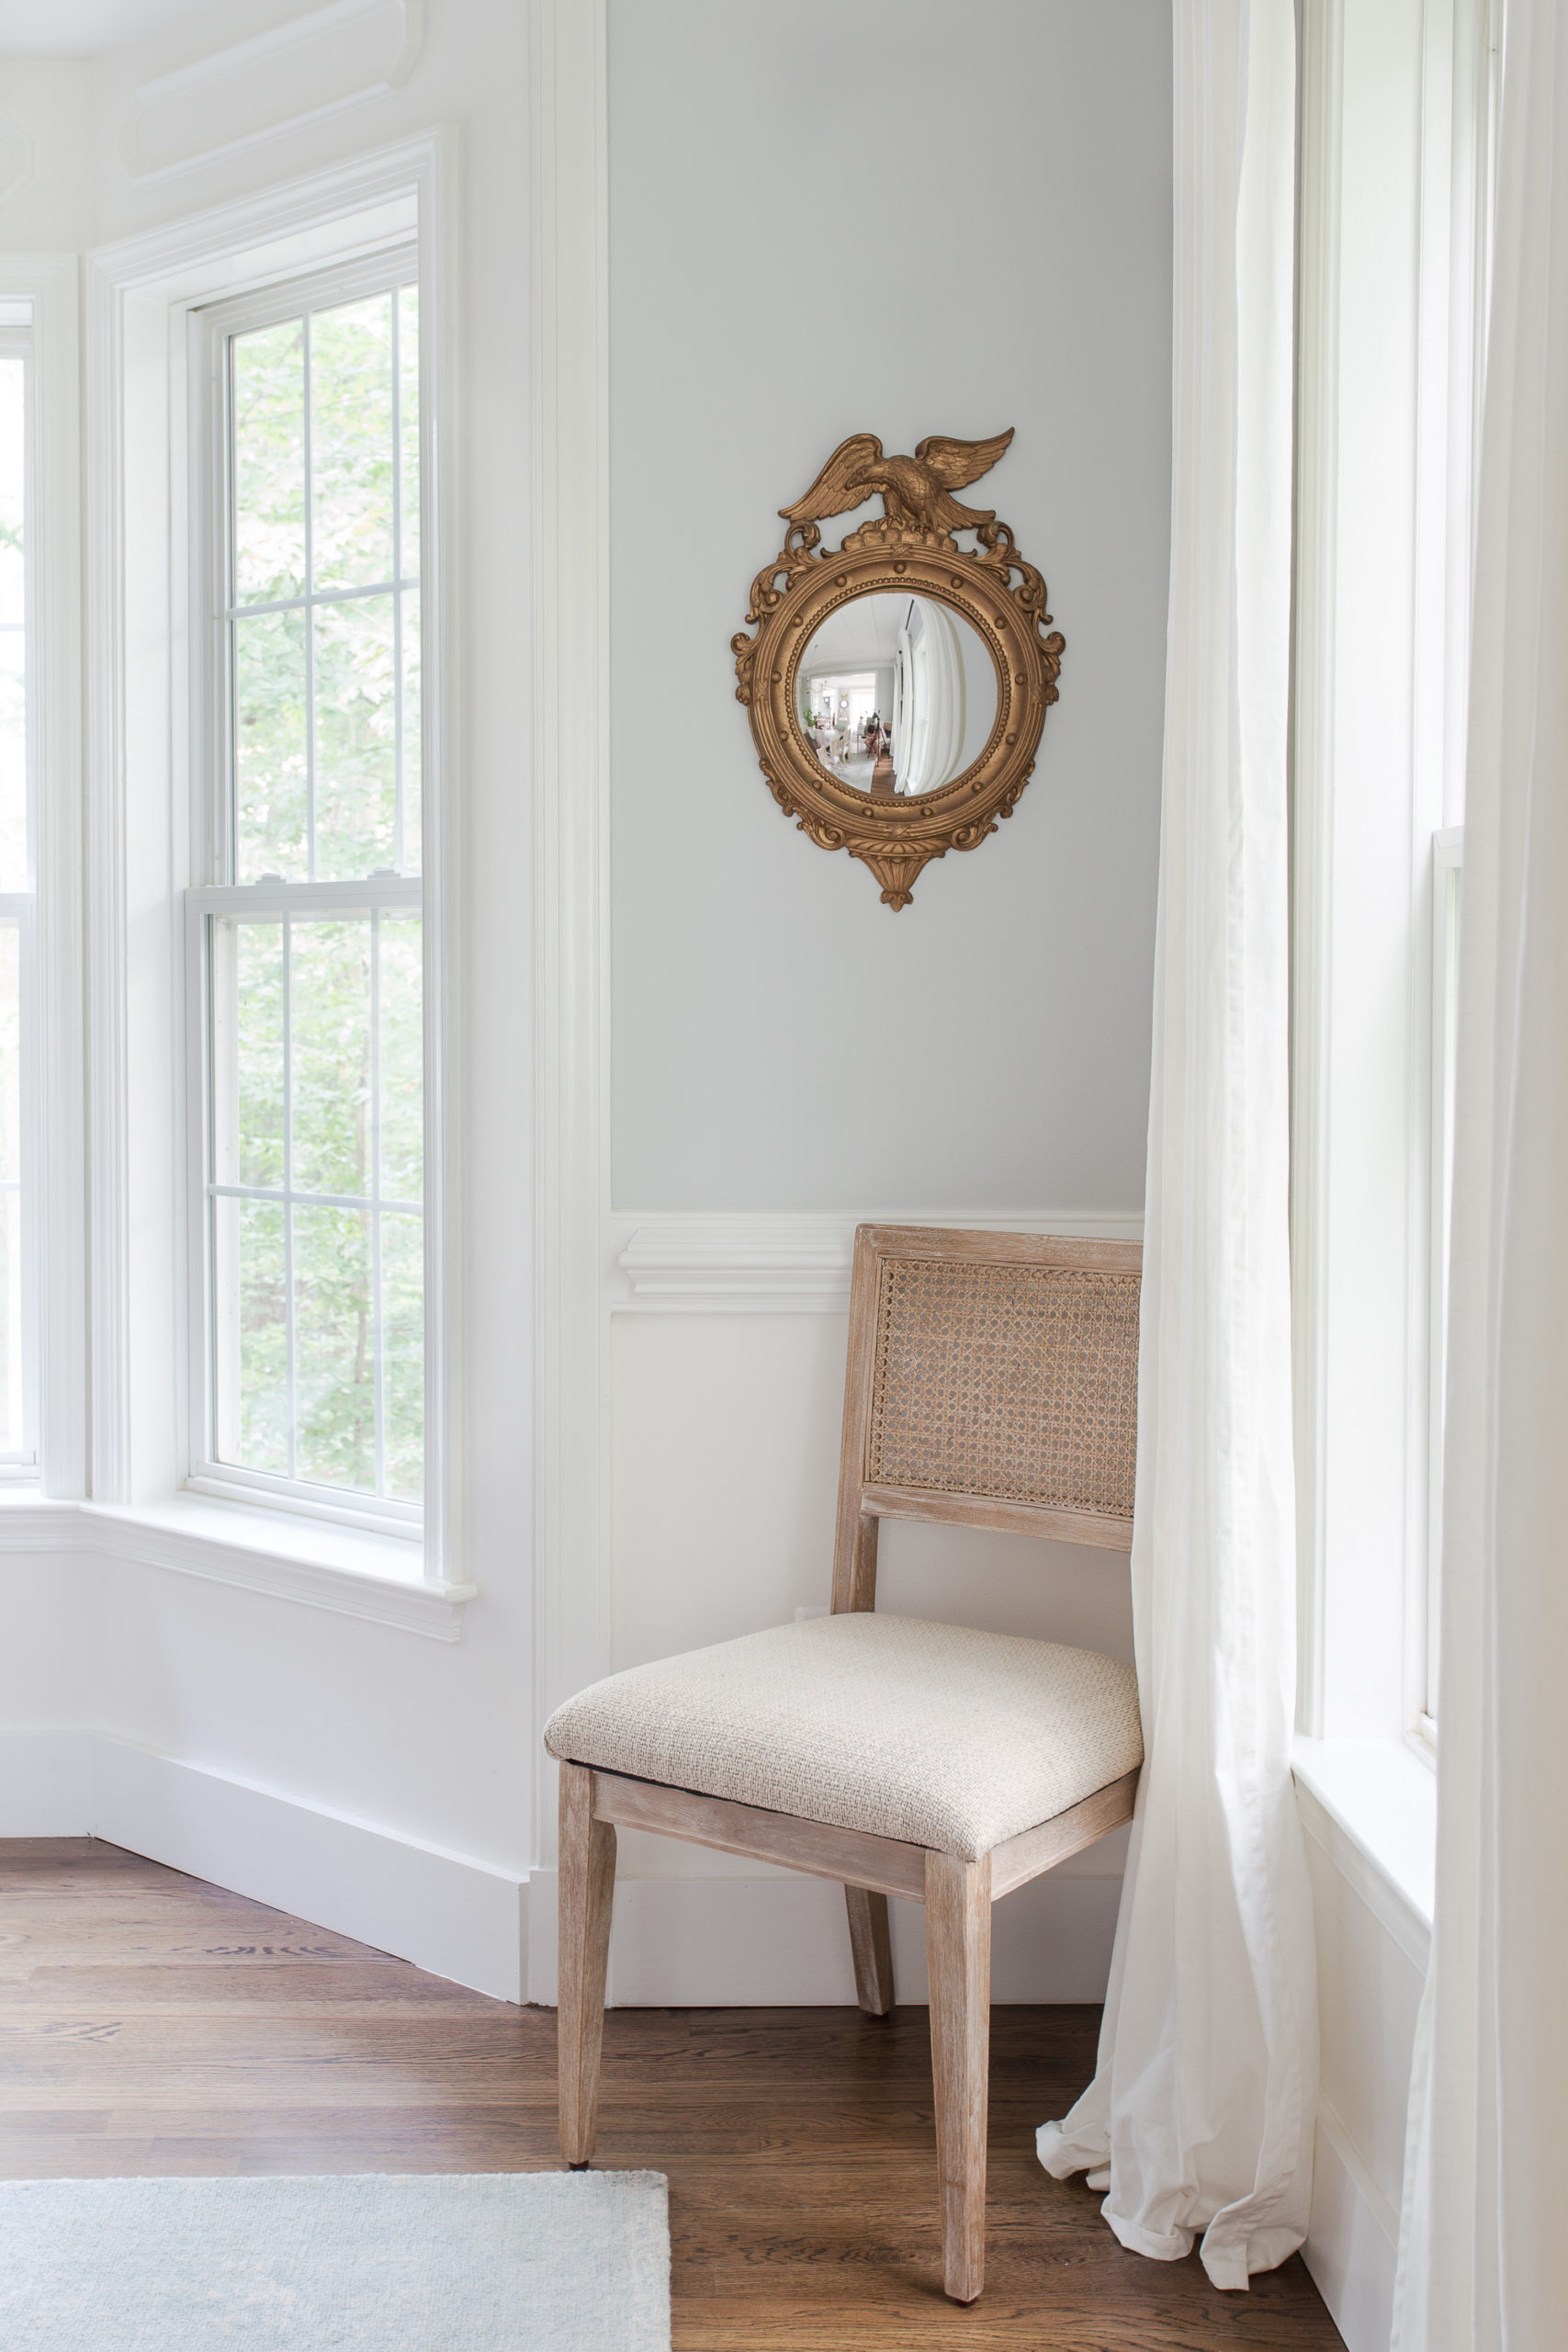 Light wood cane chair sitting in corner of dining room with round gold mirror hanging on wall above chair